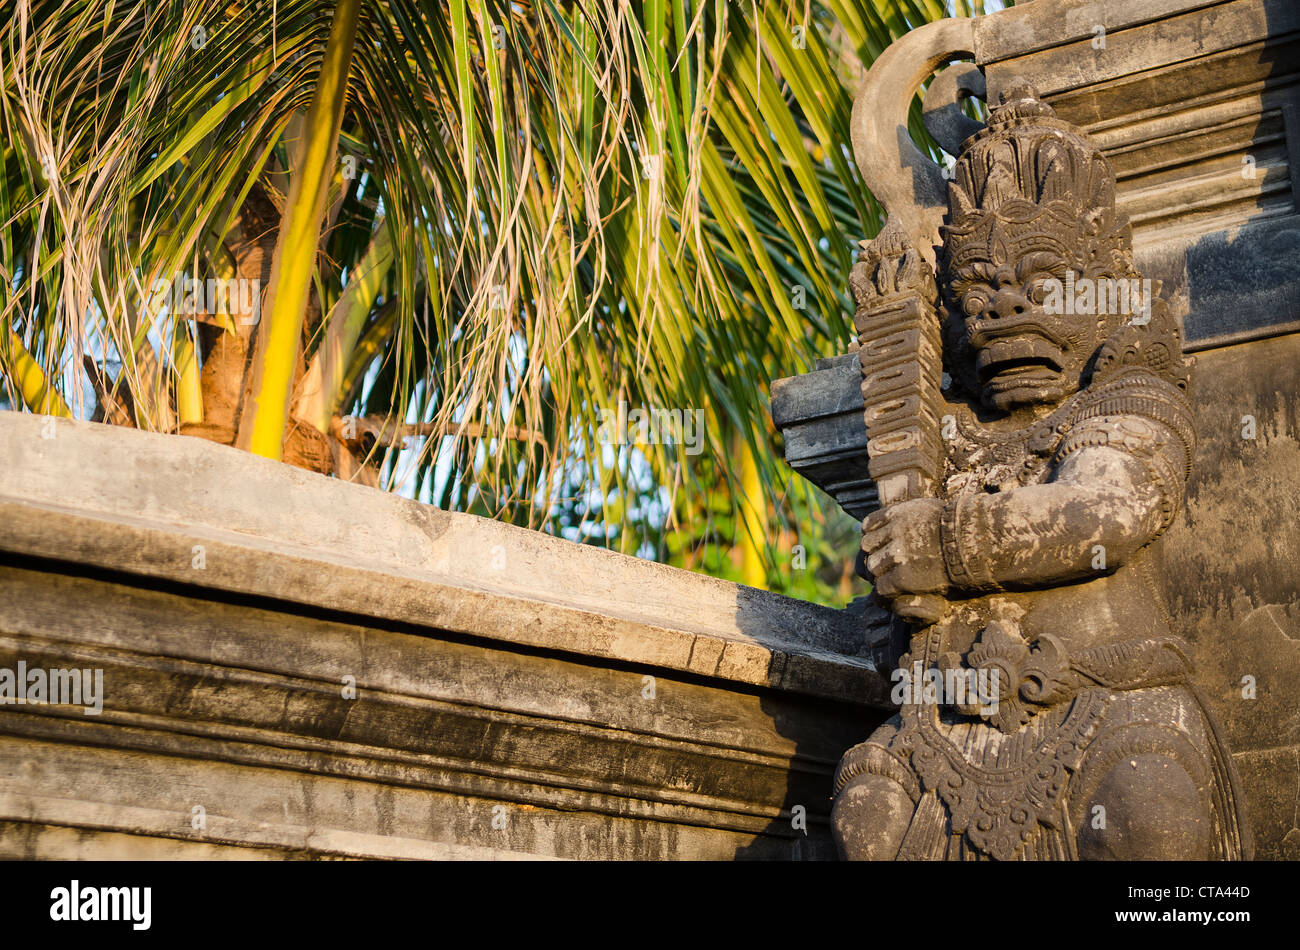 religious sculpture in tanah lot temple bali indonesia Stock Photo